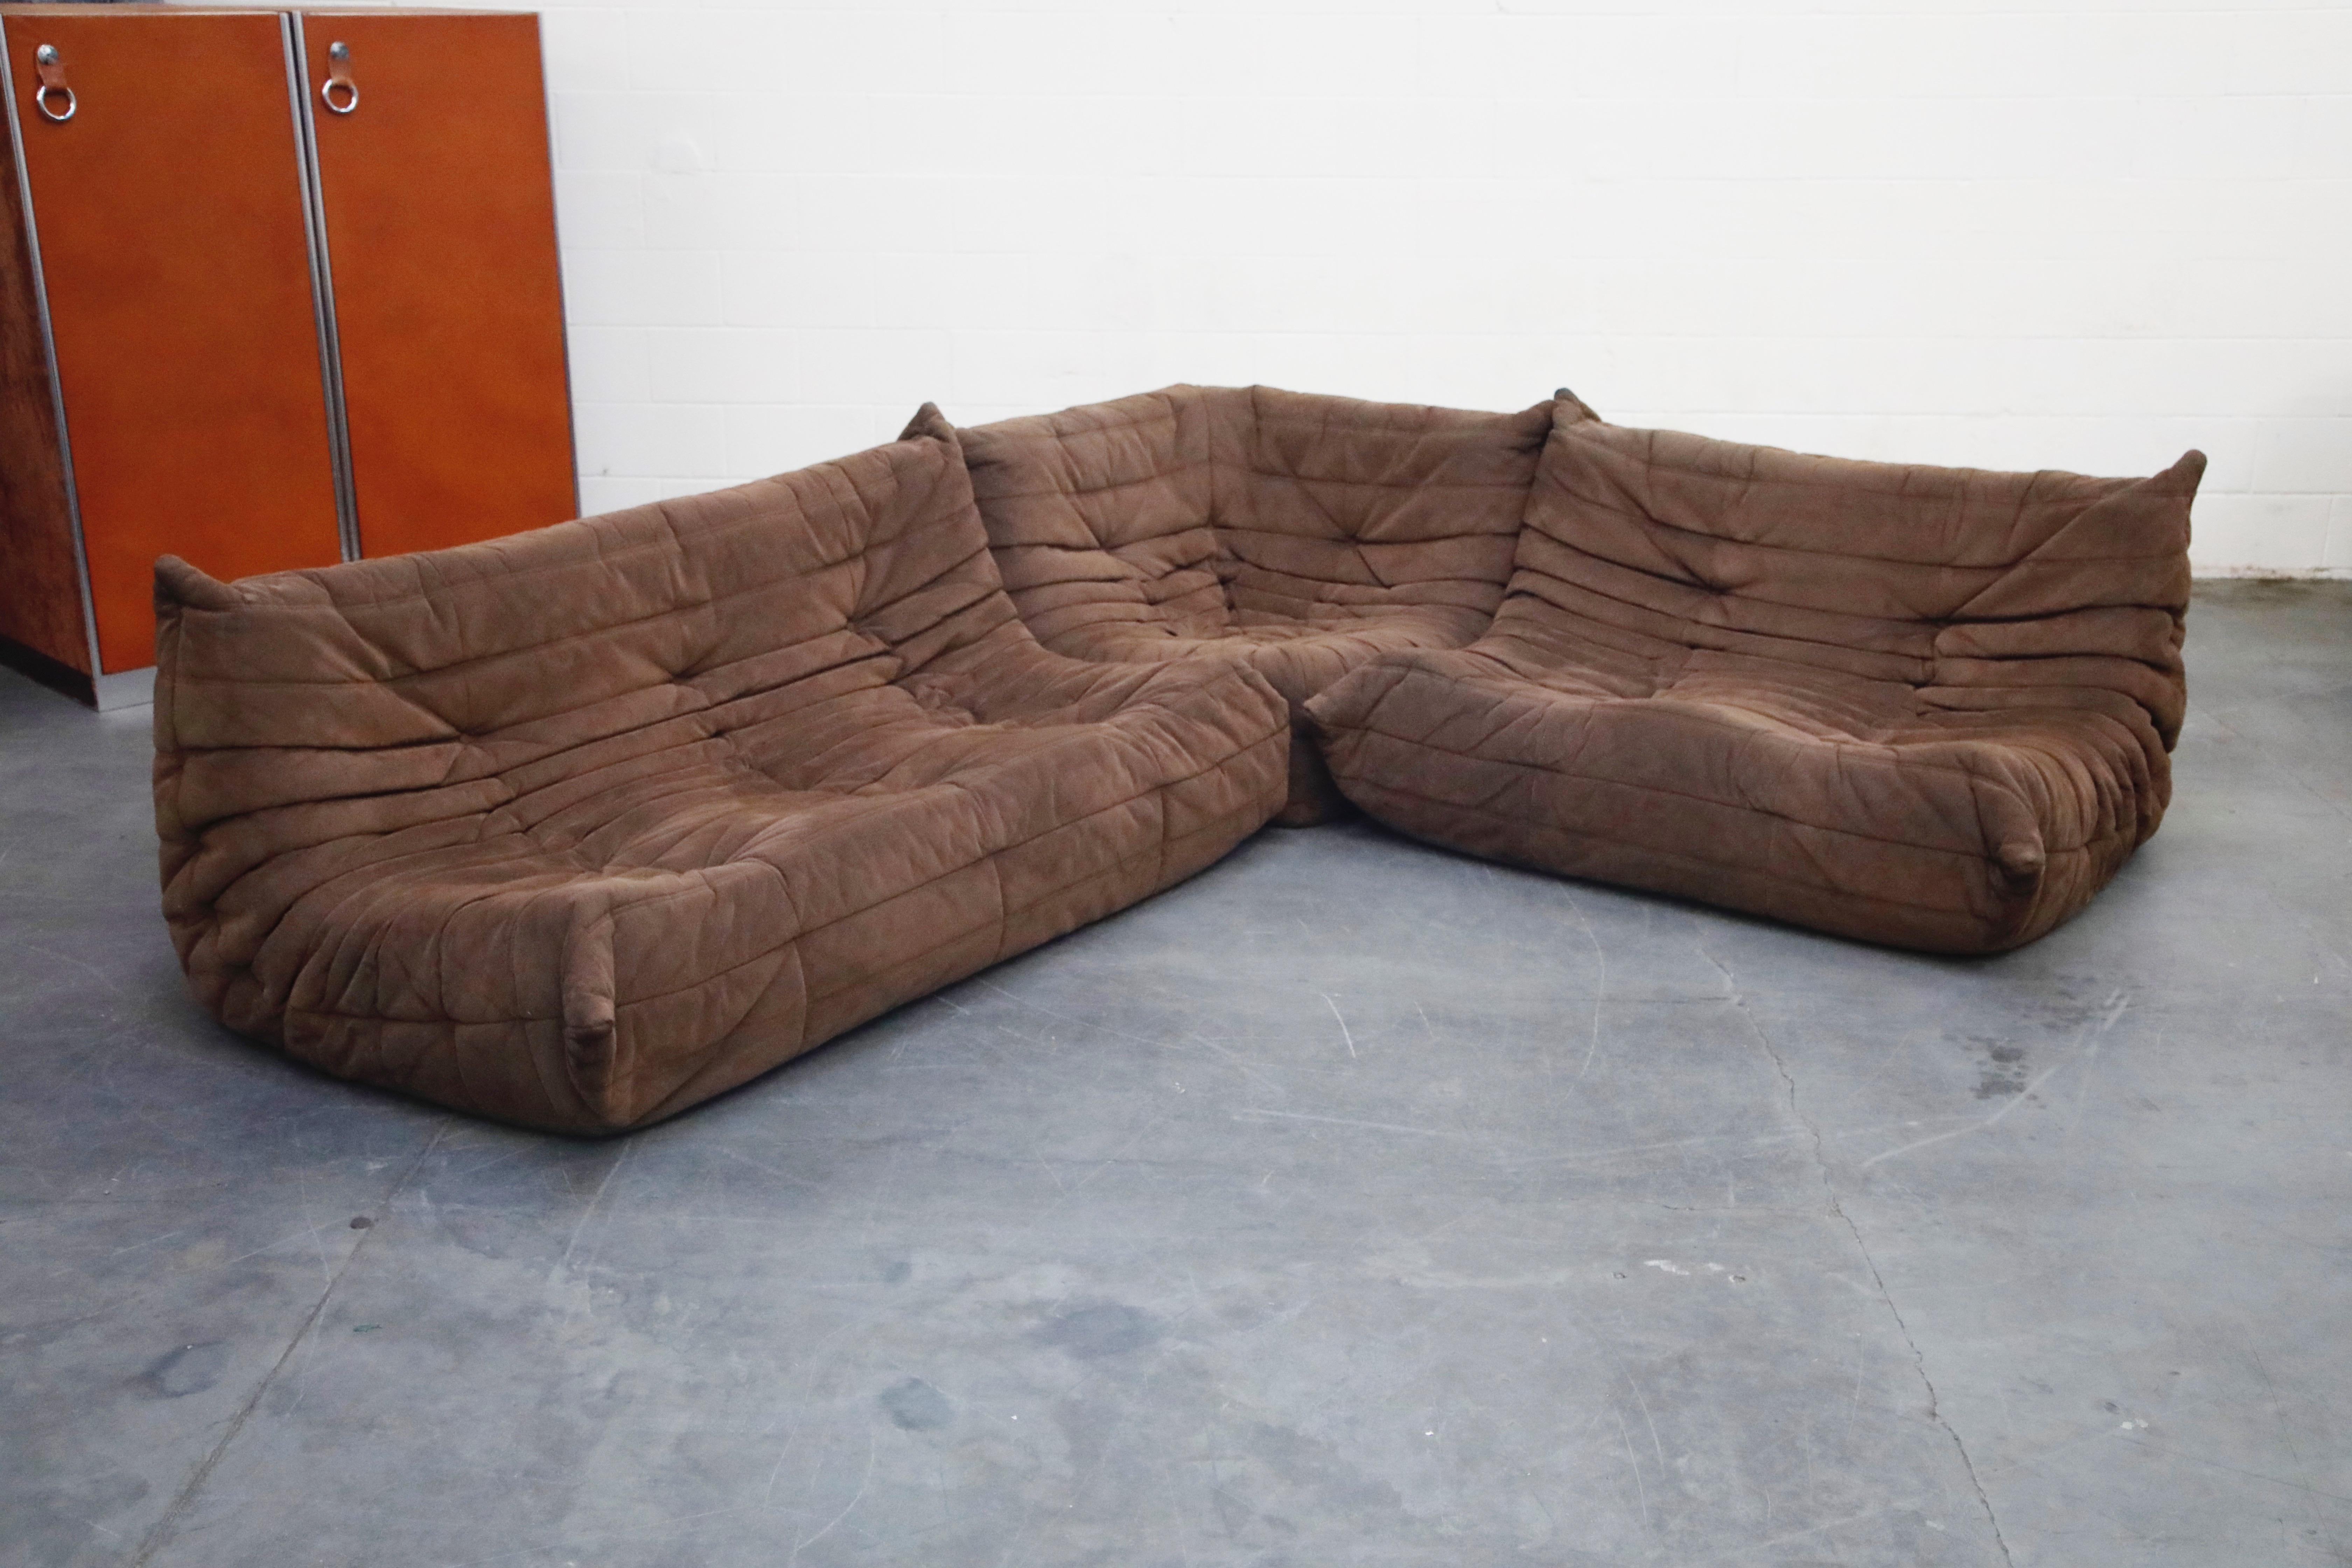 This incredible three (3) piece Togo sectional living room set, was designed by Michel Ducaroy in 1973 for Ligne Roset, France. Signed with Ligne Roset underside decking fabric and labels on each piece. Originally designed in the 1970s, this set